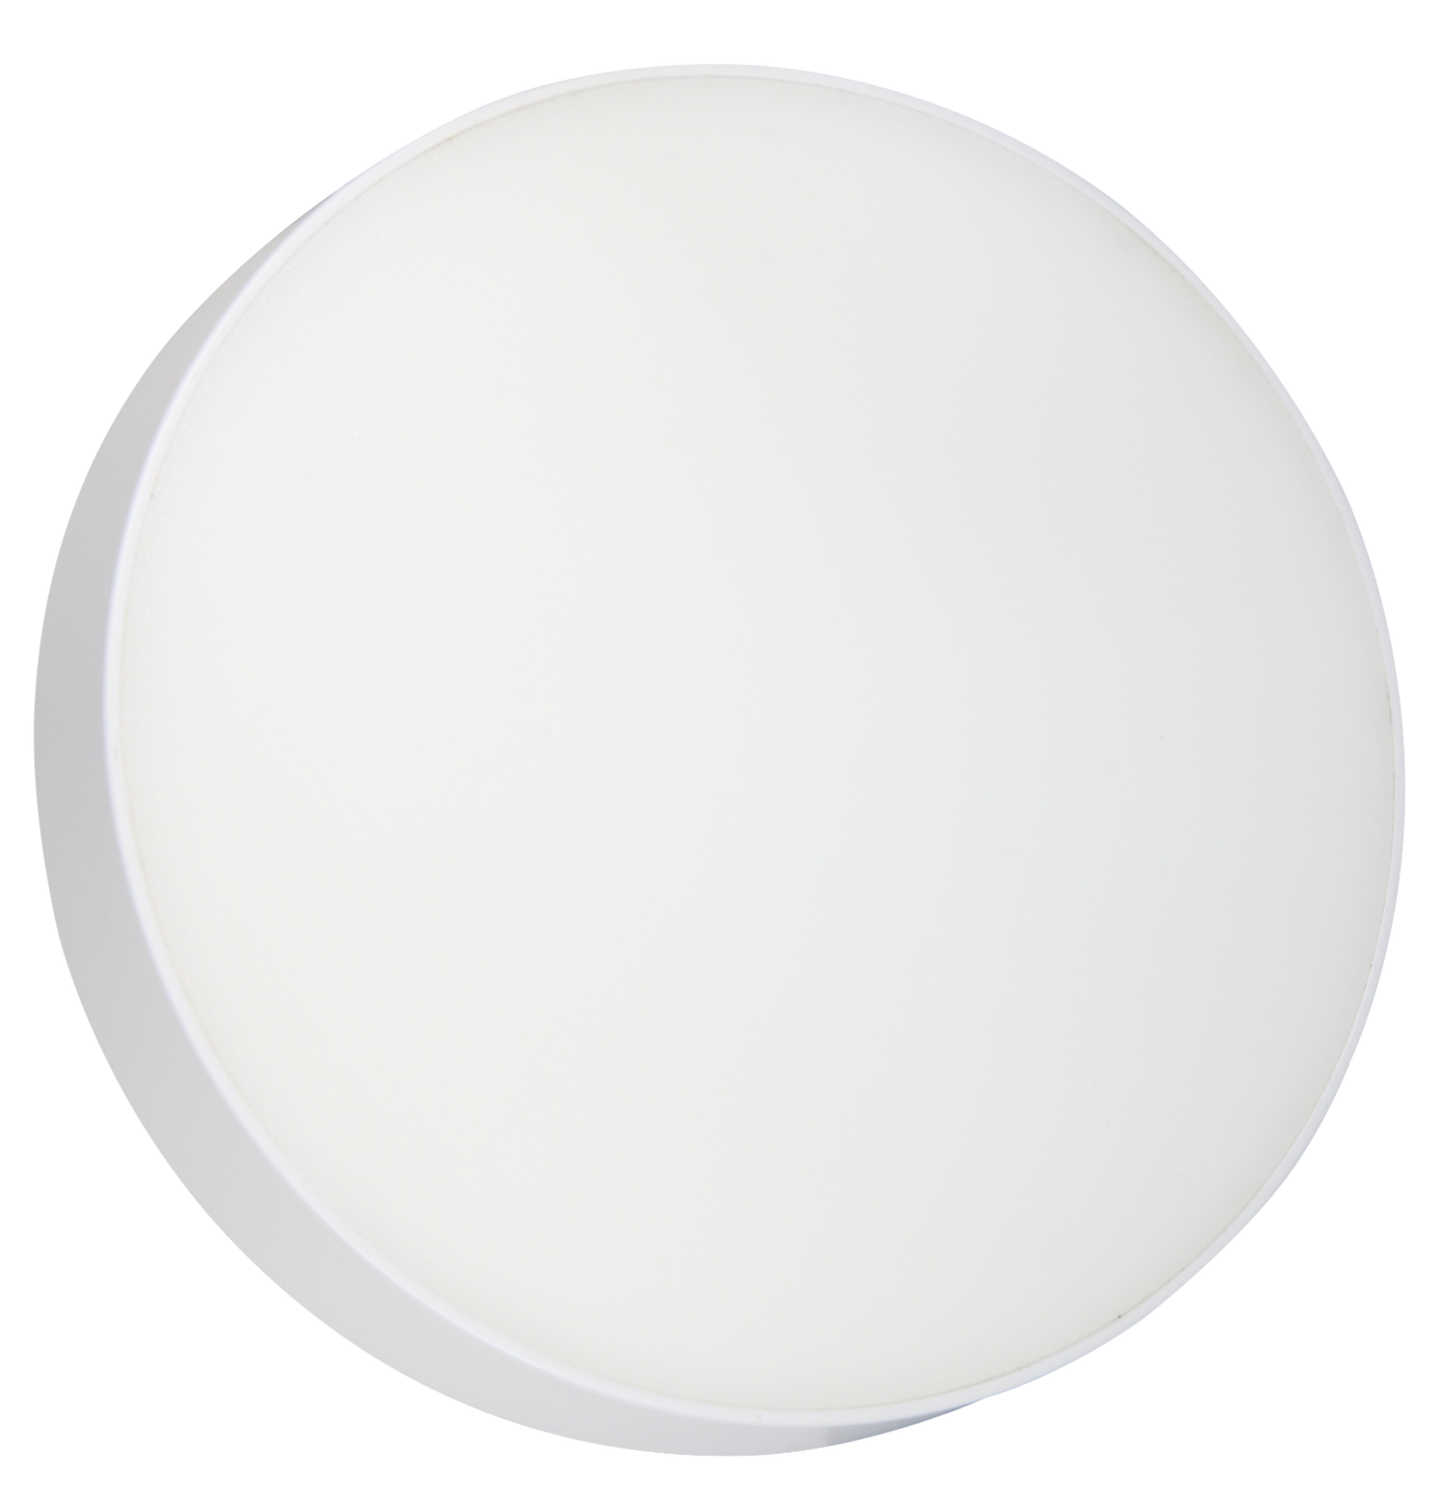 Load image into Gallery viewer, Round Surface Panel Backlit 8 Watt by Ledos (SP 751)
